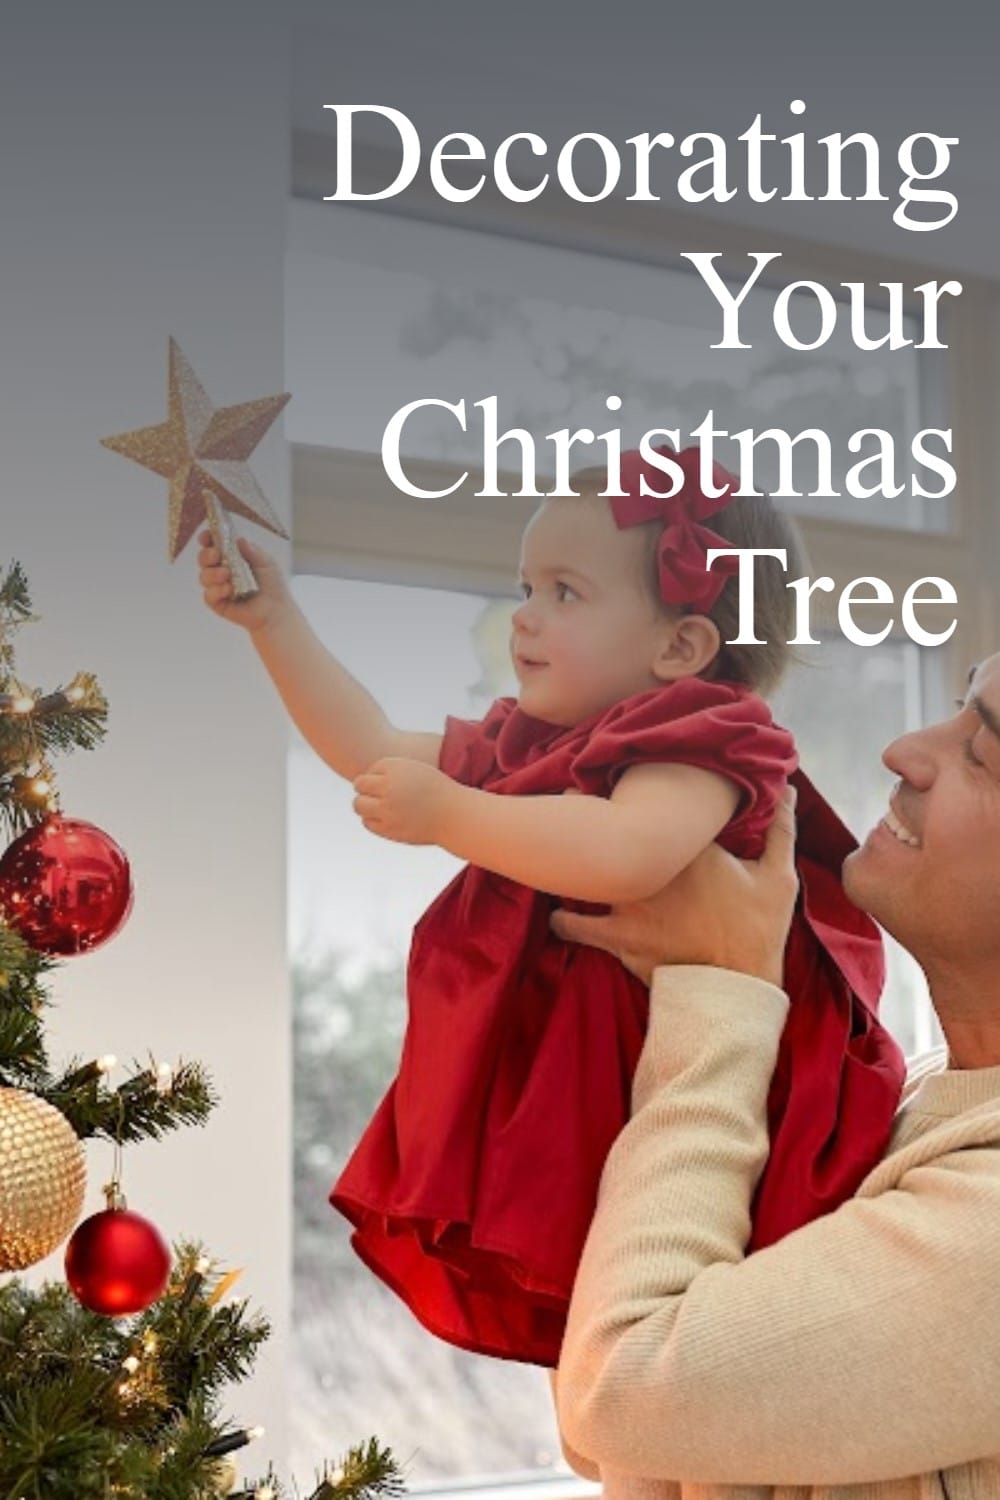 Everything you need to know about Christmas Tree Decorations. Choosing a tree and your decor. Will it be DIY, vintage or traditional? via @repurposedlife